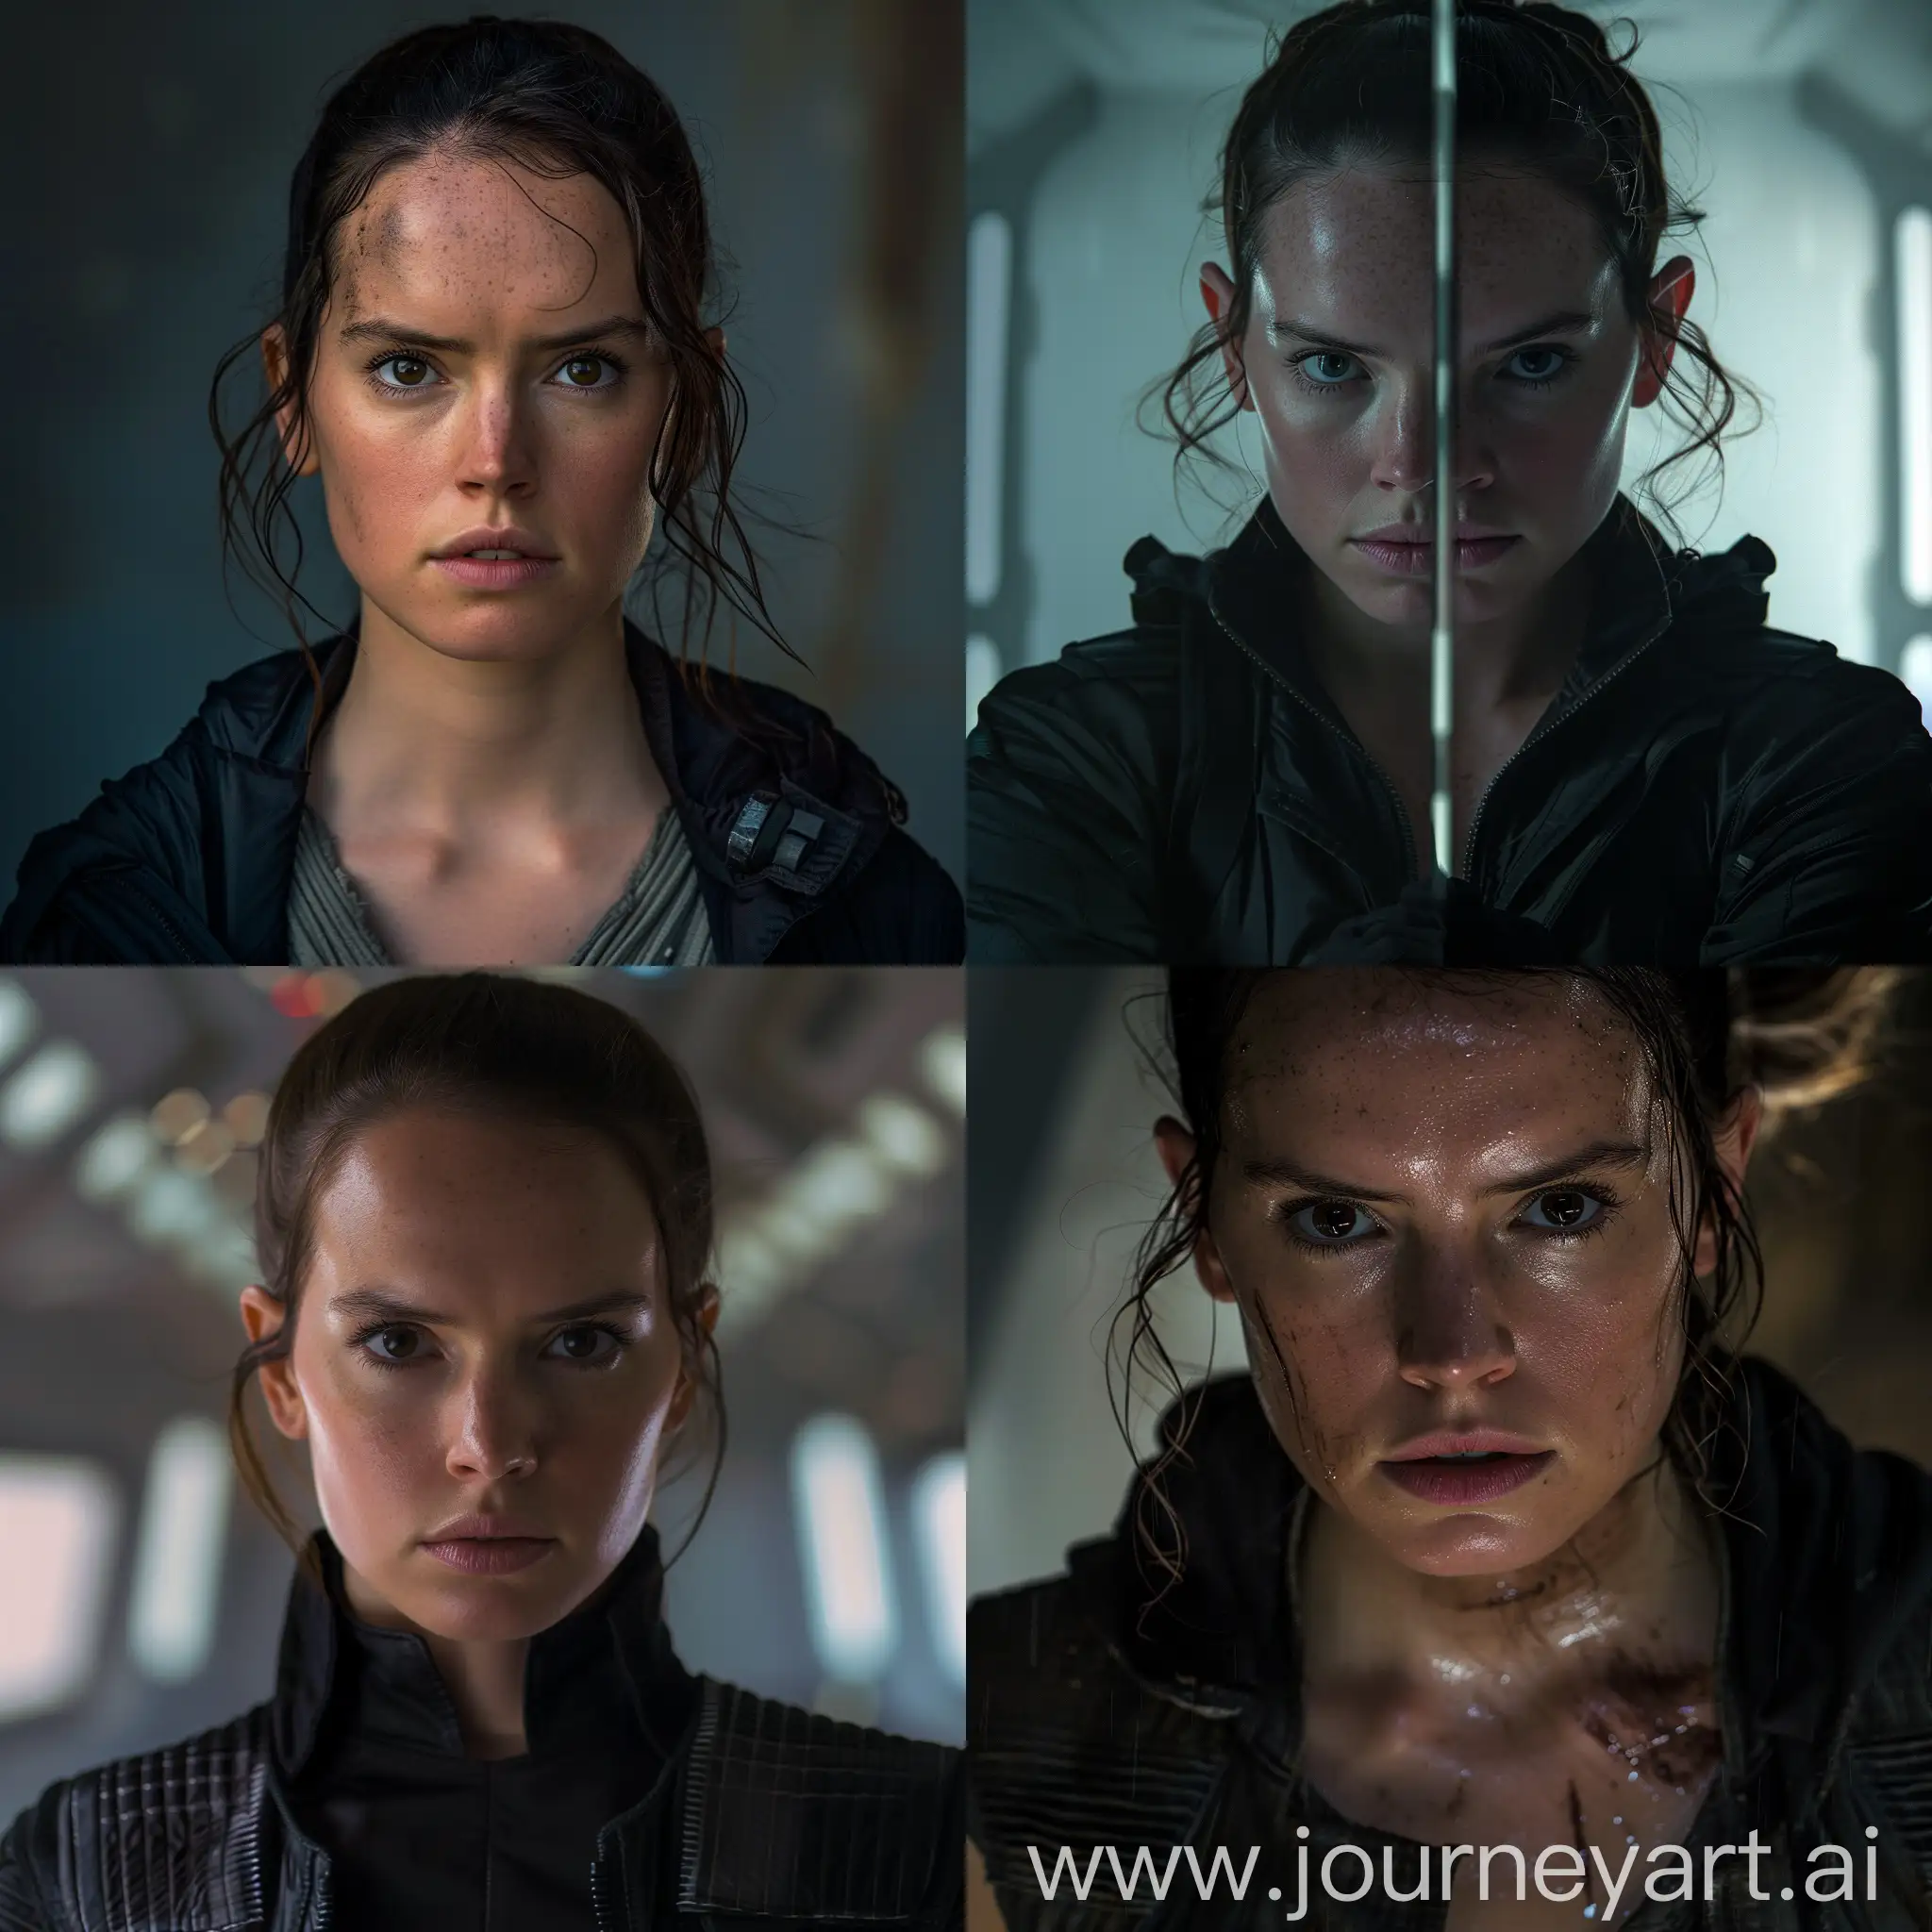 Daisy-Ridley-Portrays-Rey-Skywalker-in-Mission-Impossible-Scenes-with-Black-Jacket-8K-Resolution